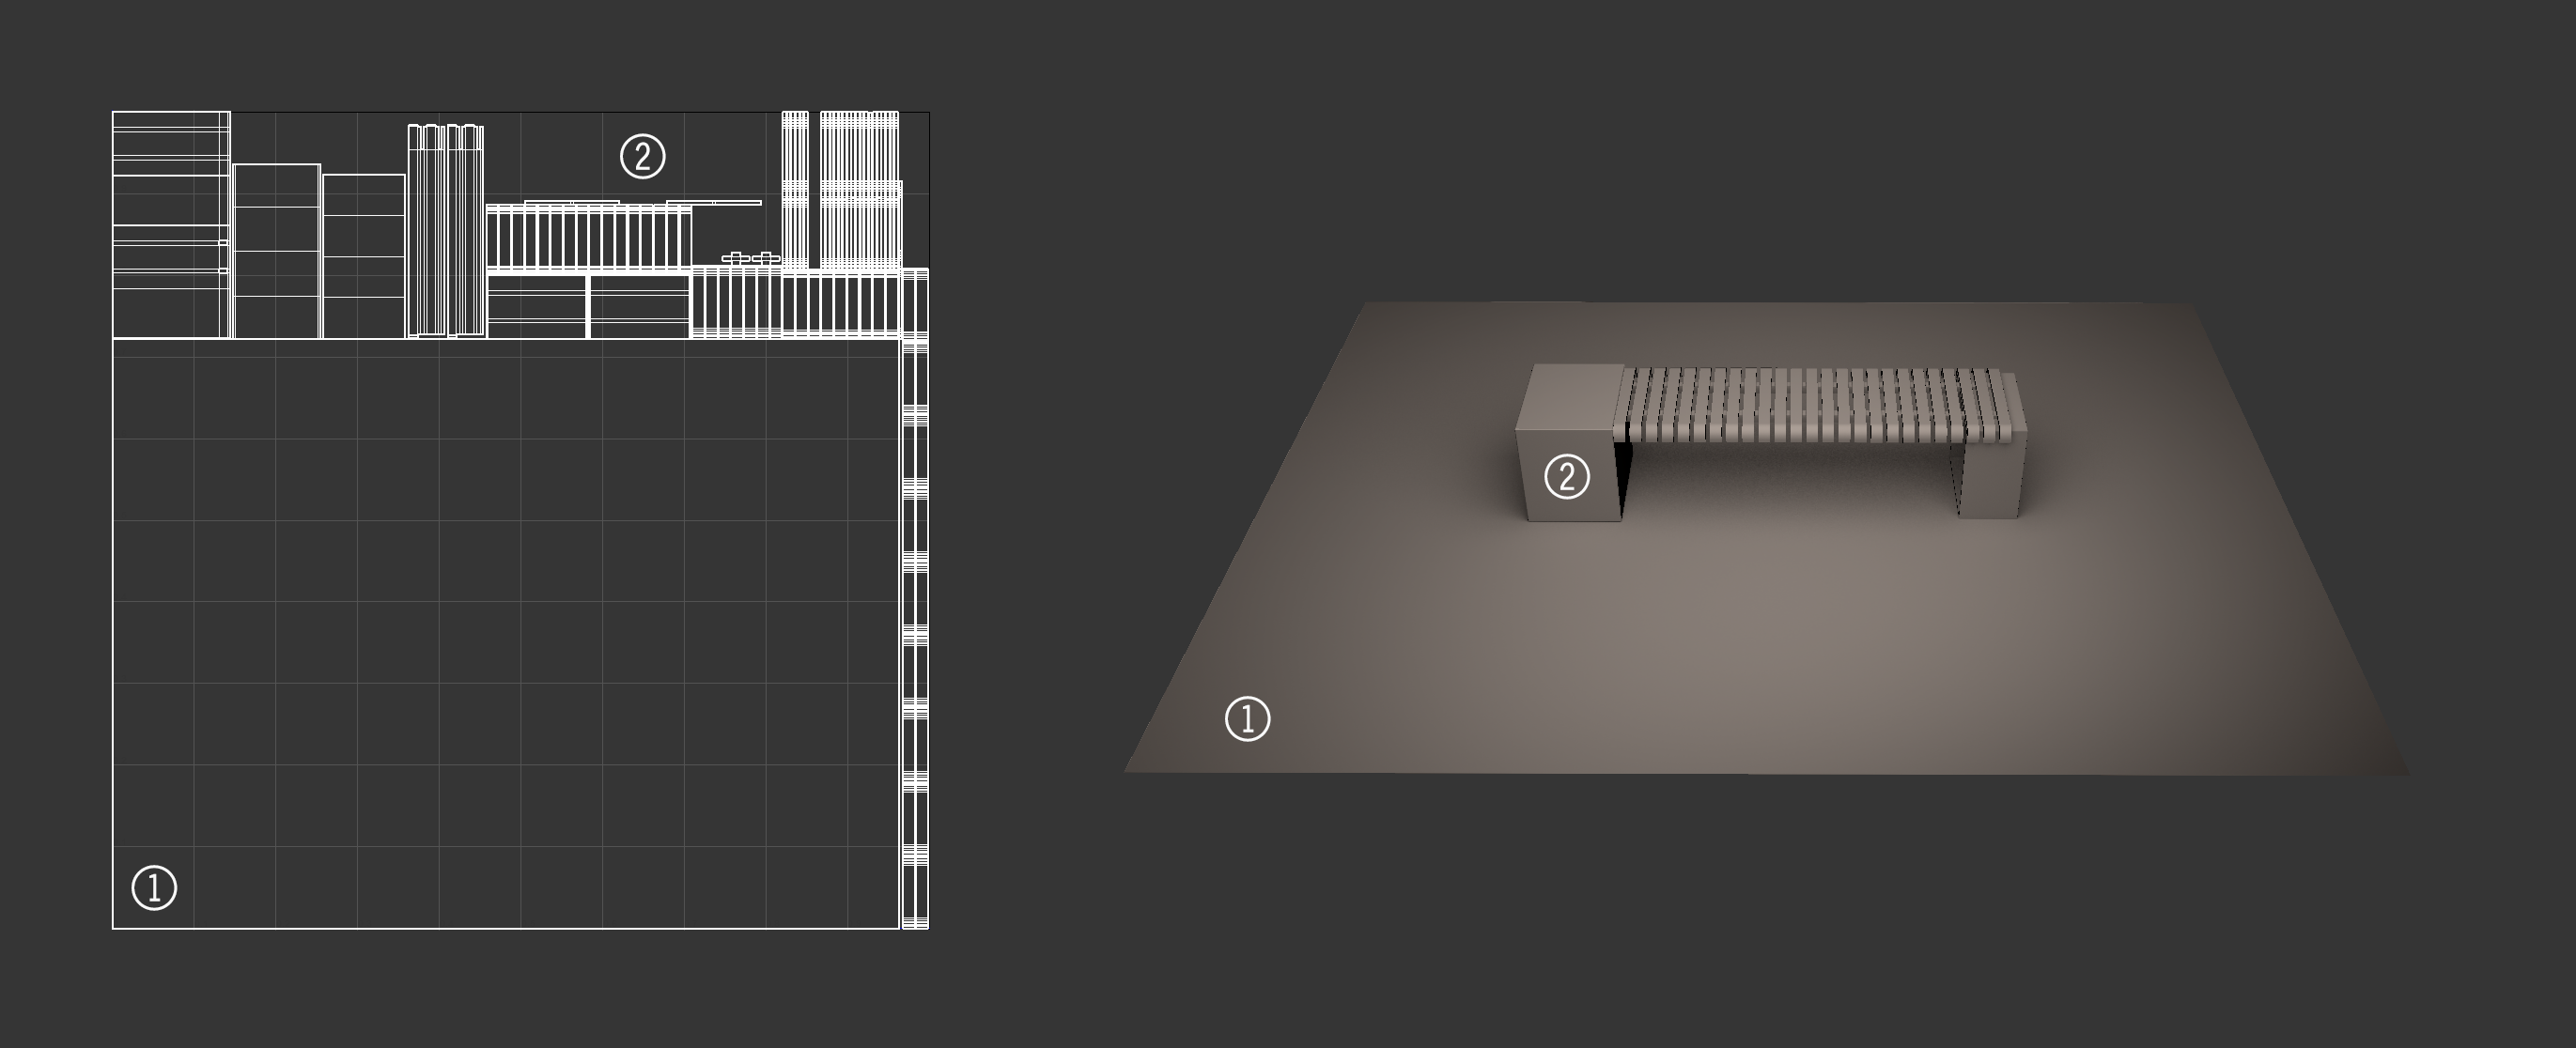 The same layout of bench on plane, but this time showing shadows cast by the bench on the bench and ground while the UV layout has changed to show only a single layout with both ground and bench pieces in one layout with no overlapping